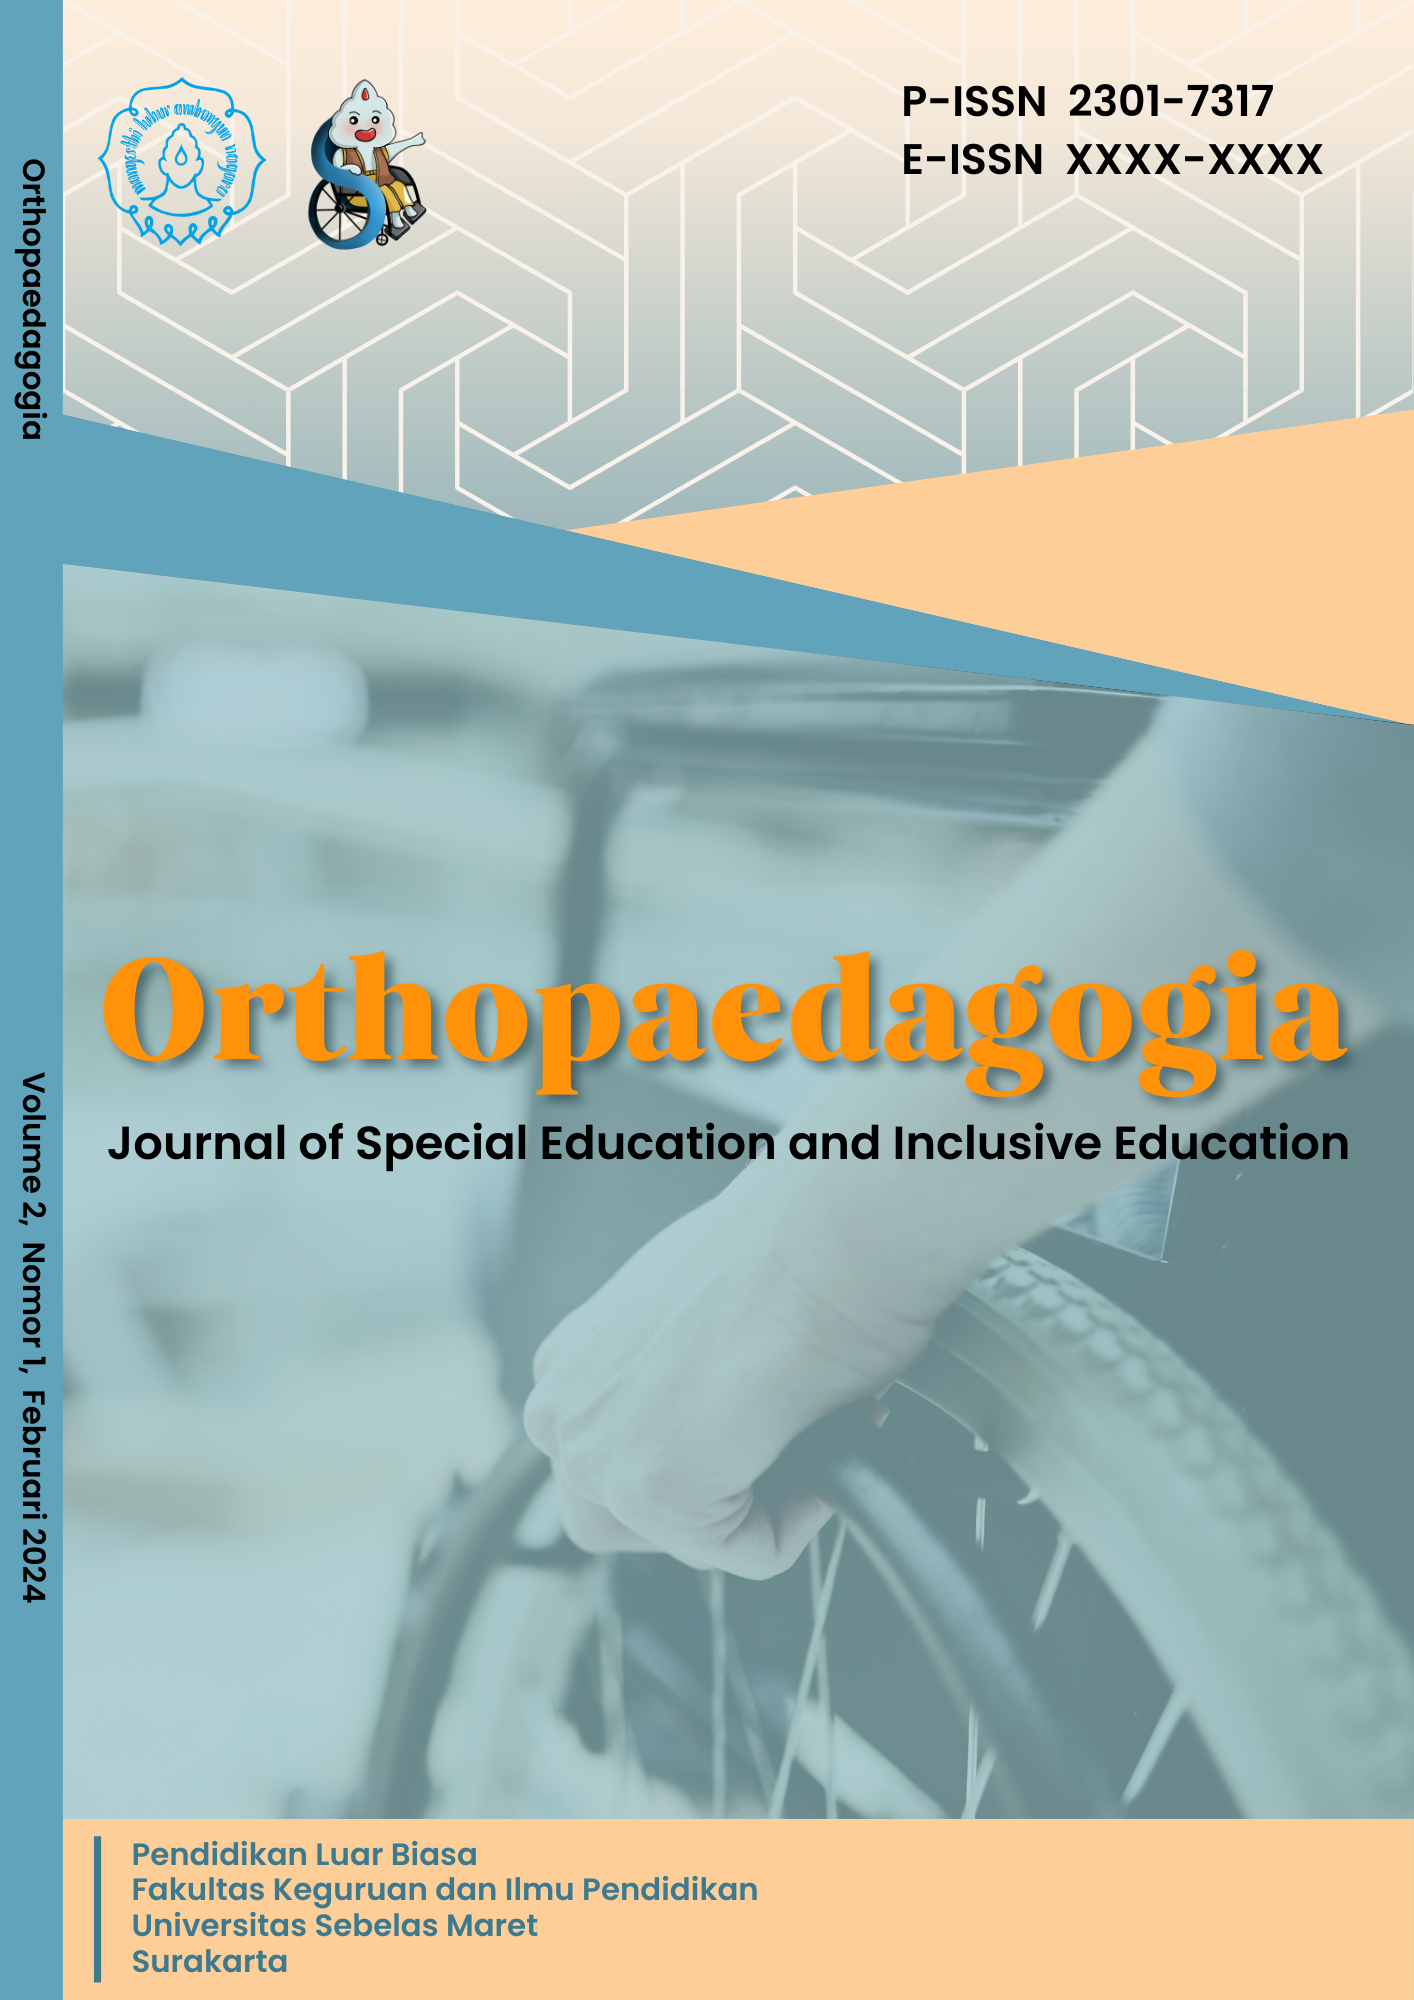 Orthopaedagogia: Journal of Special Education and Inclusive Education